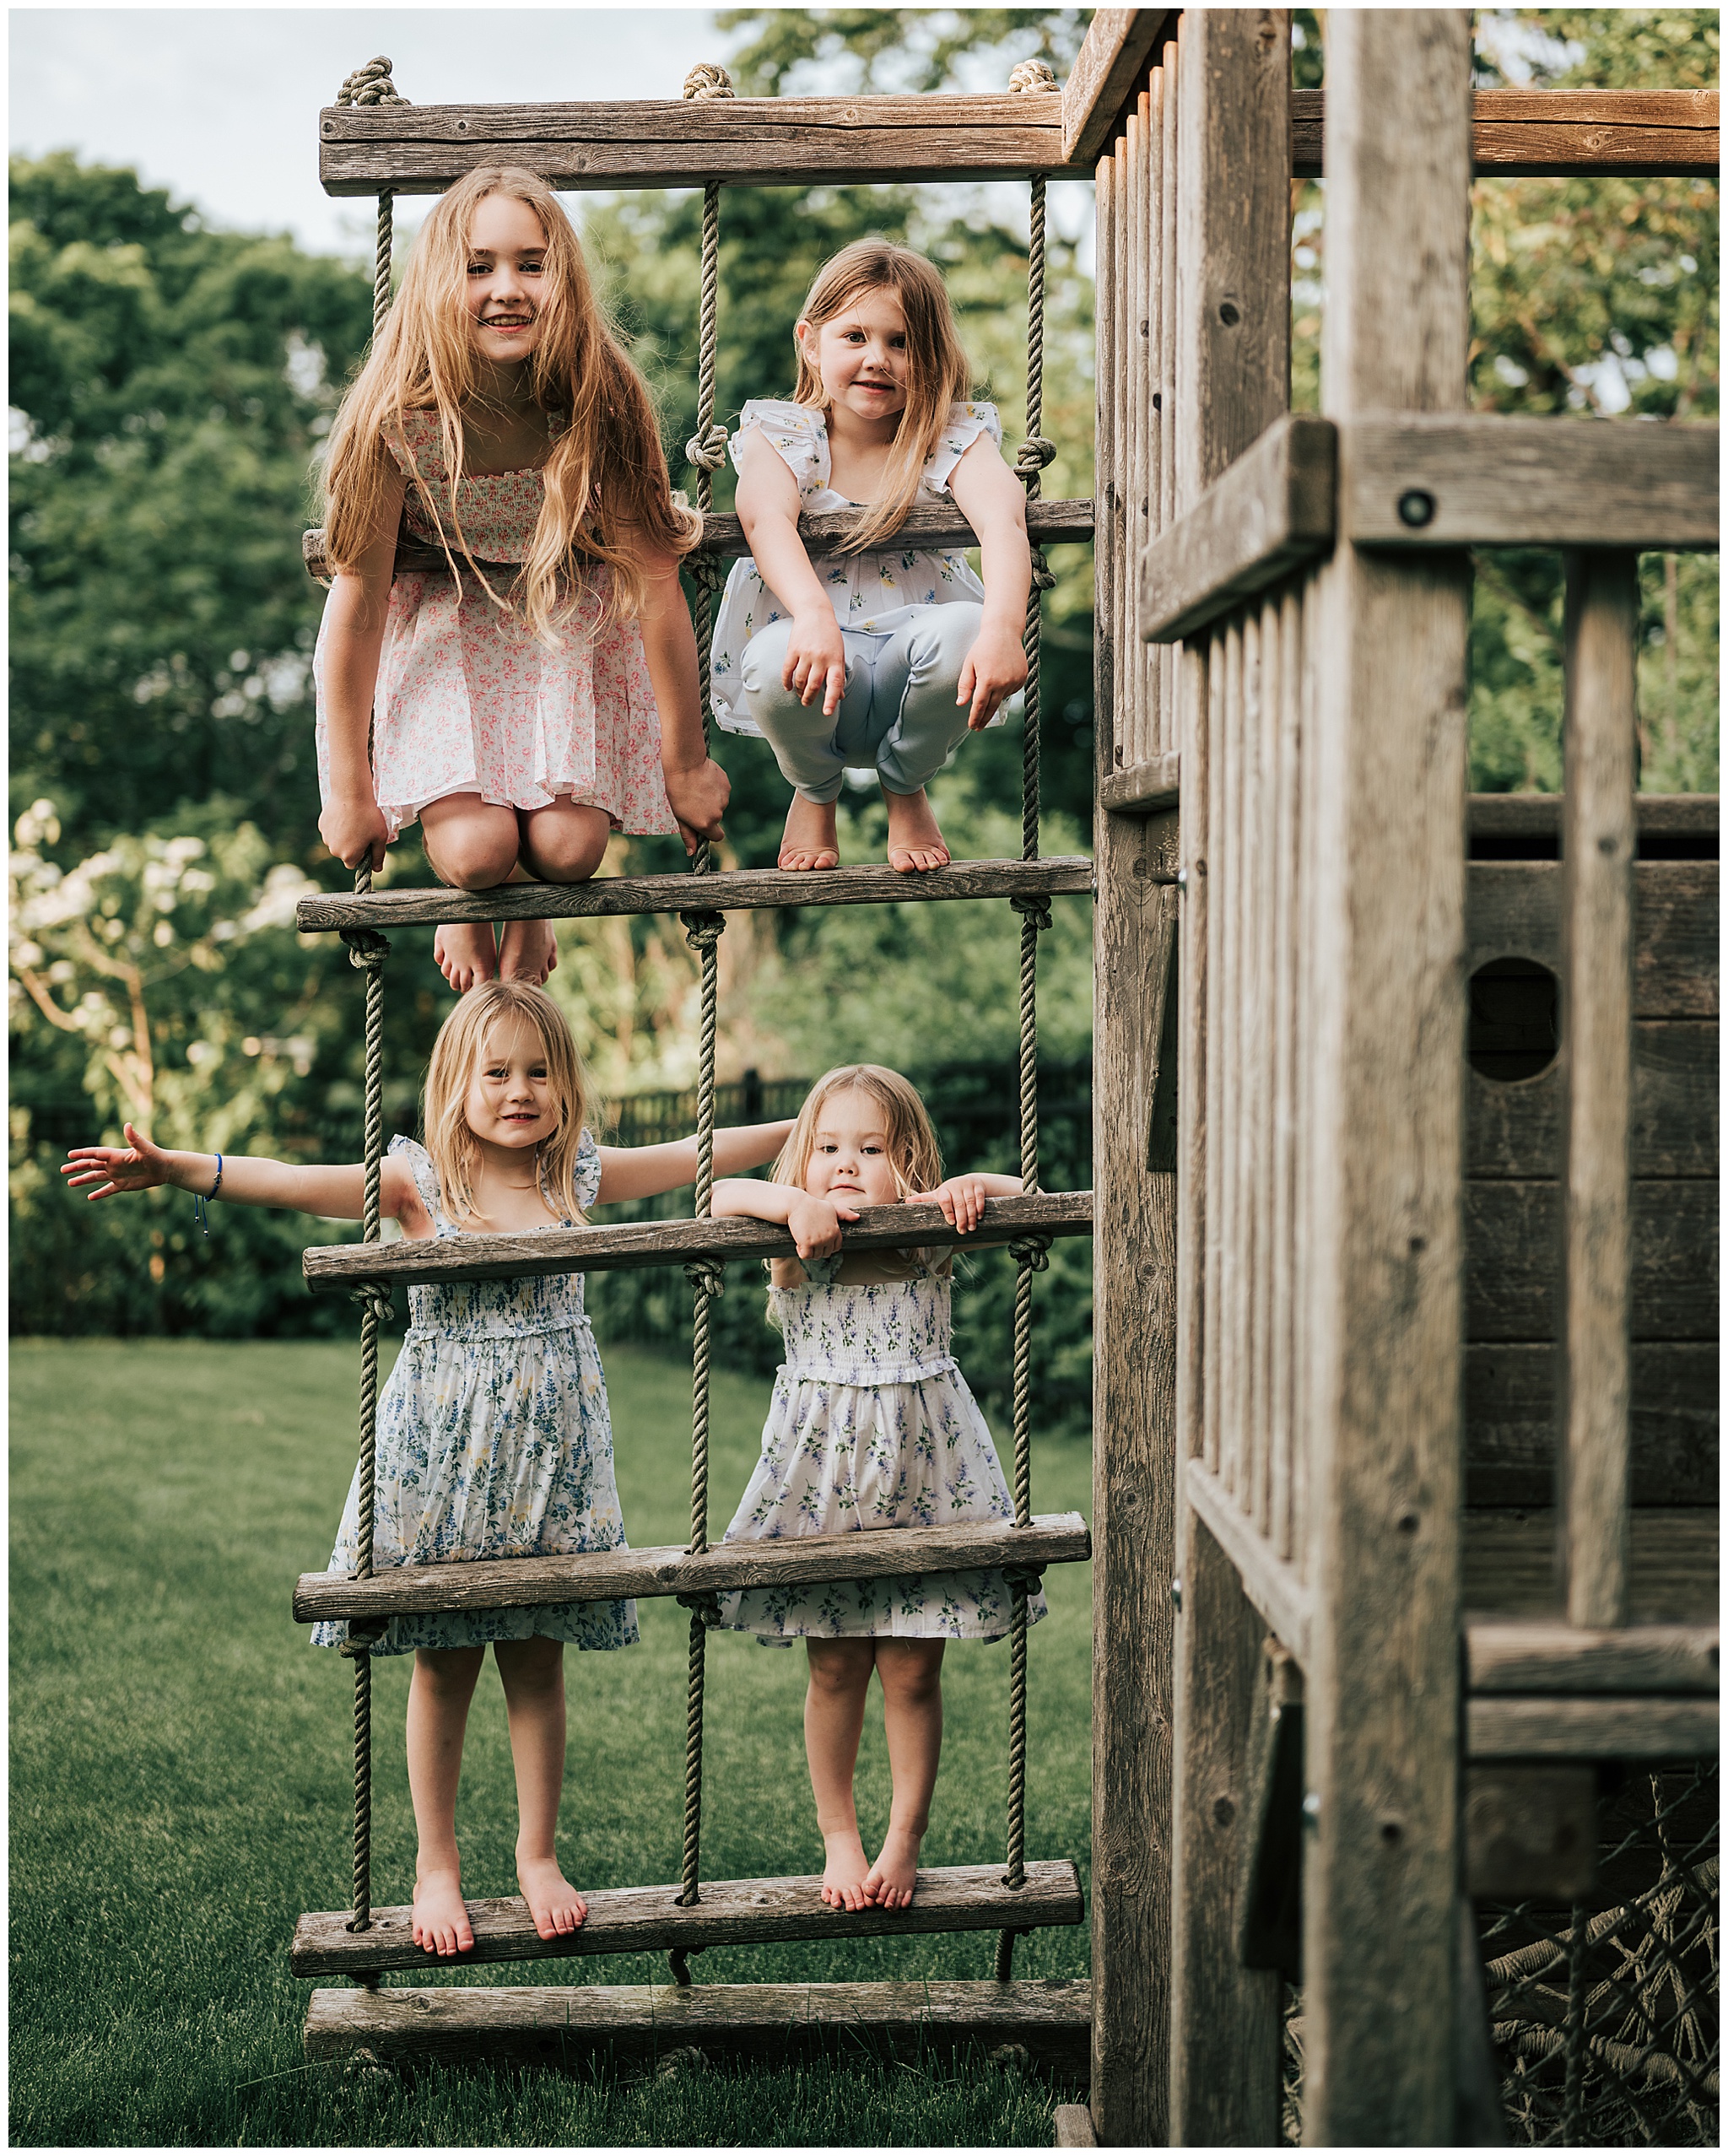 Four little girls (all sisters) standing on the rope ladder of a playground set in their Boston-area back yard during a family photography session.